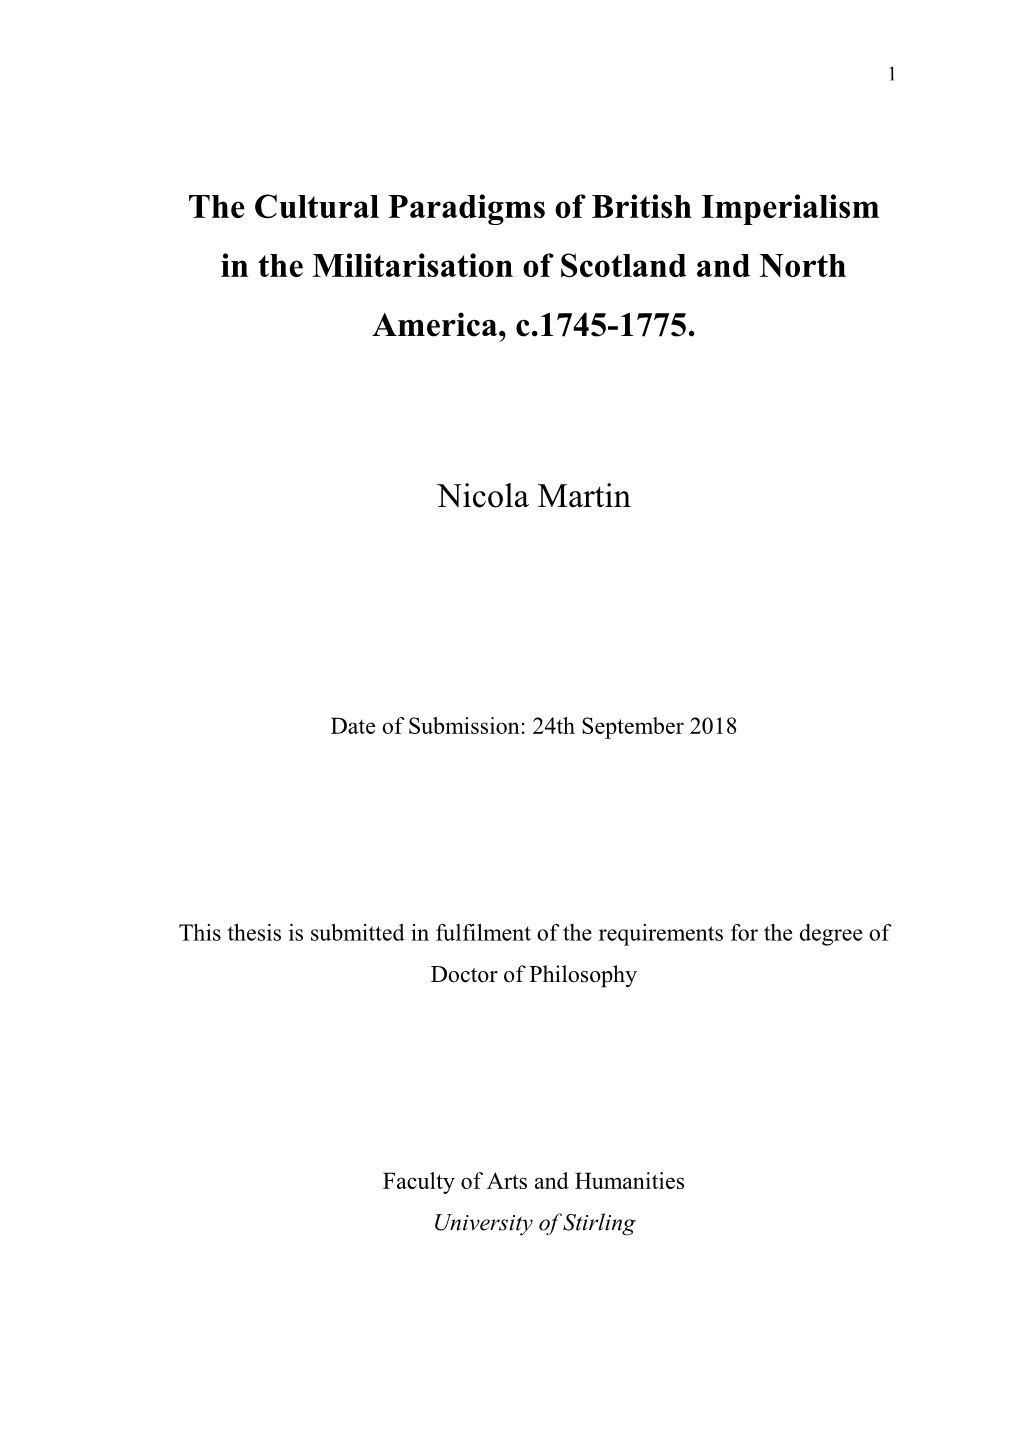 The Cultural Paradigms of British Imperialism in the Militarisation of Scotland and North America, C.1745-1775